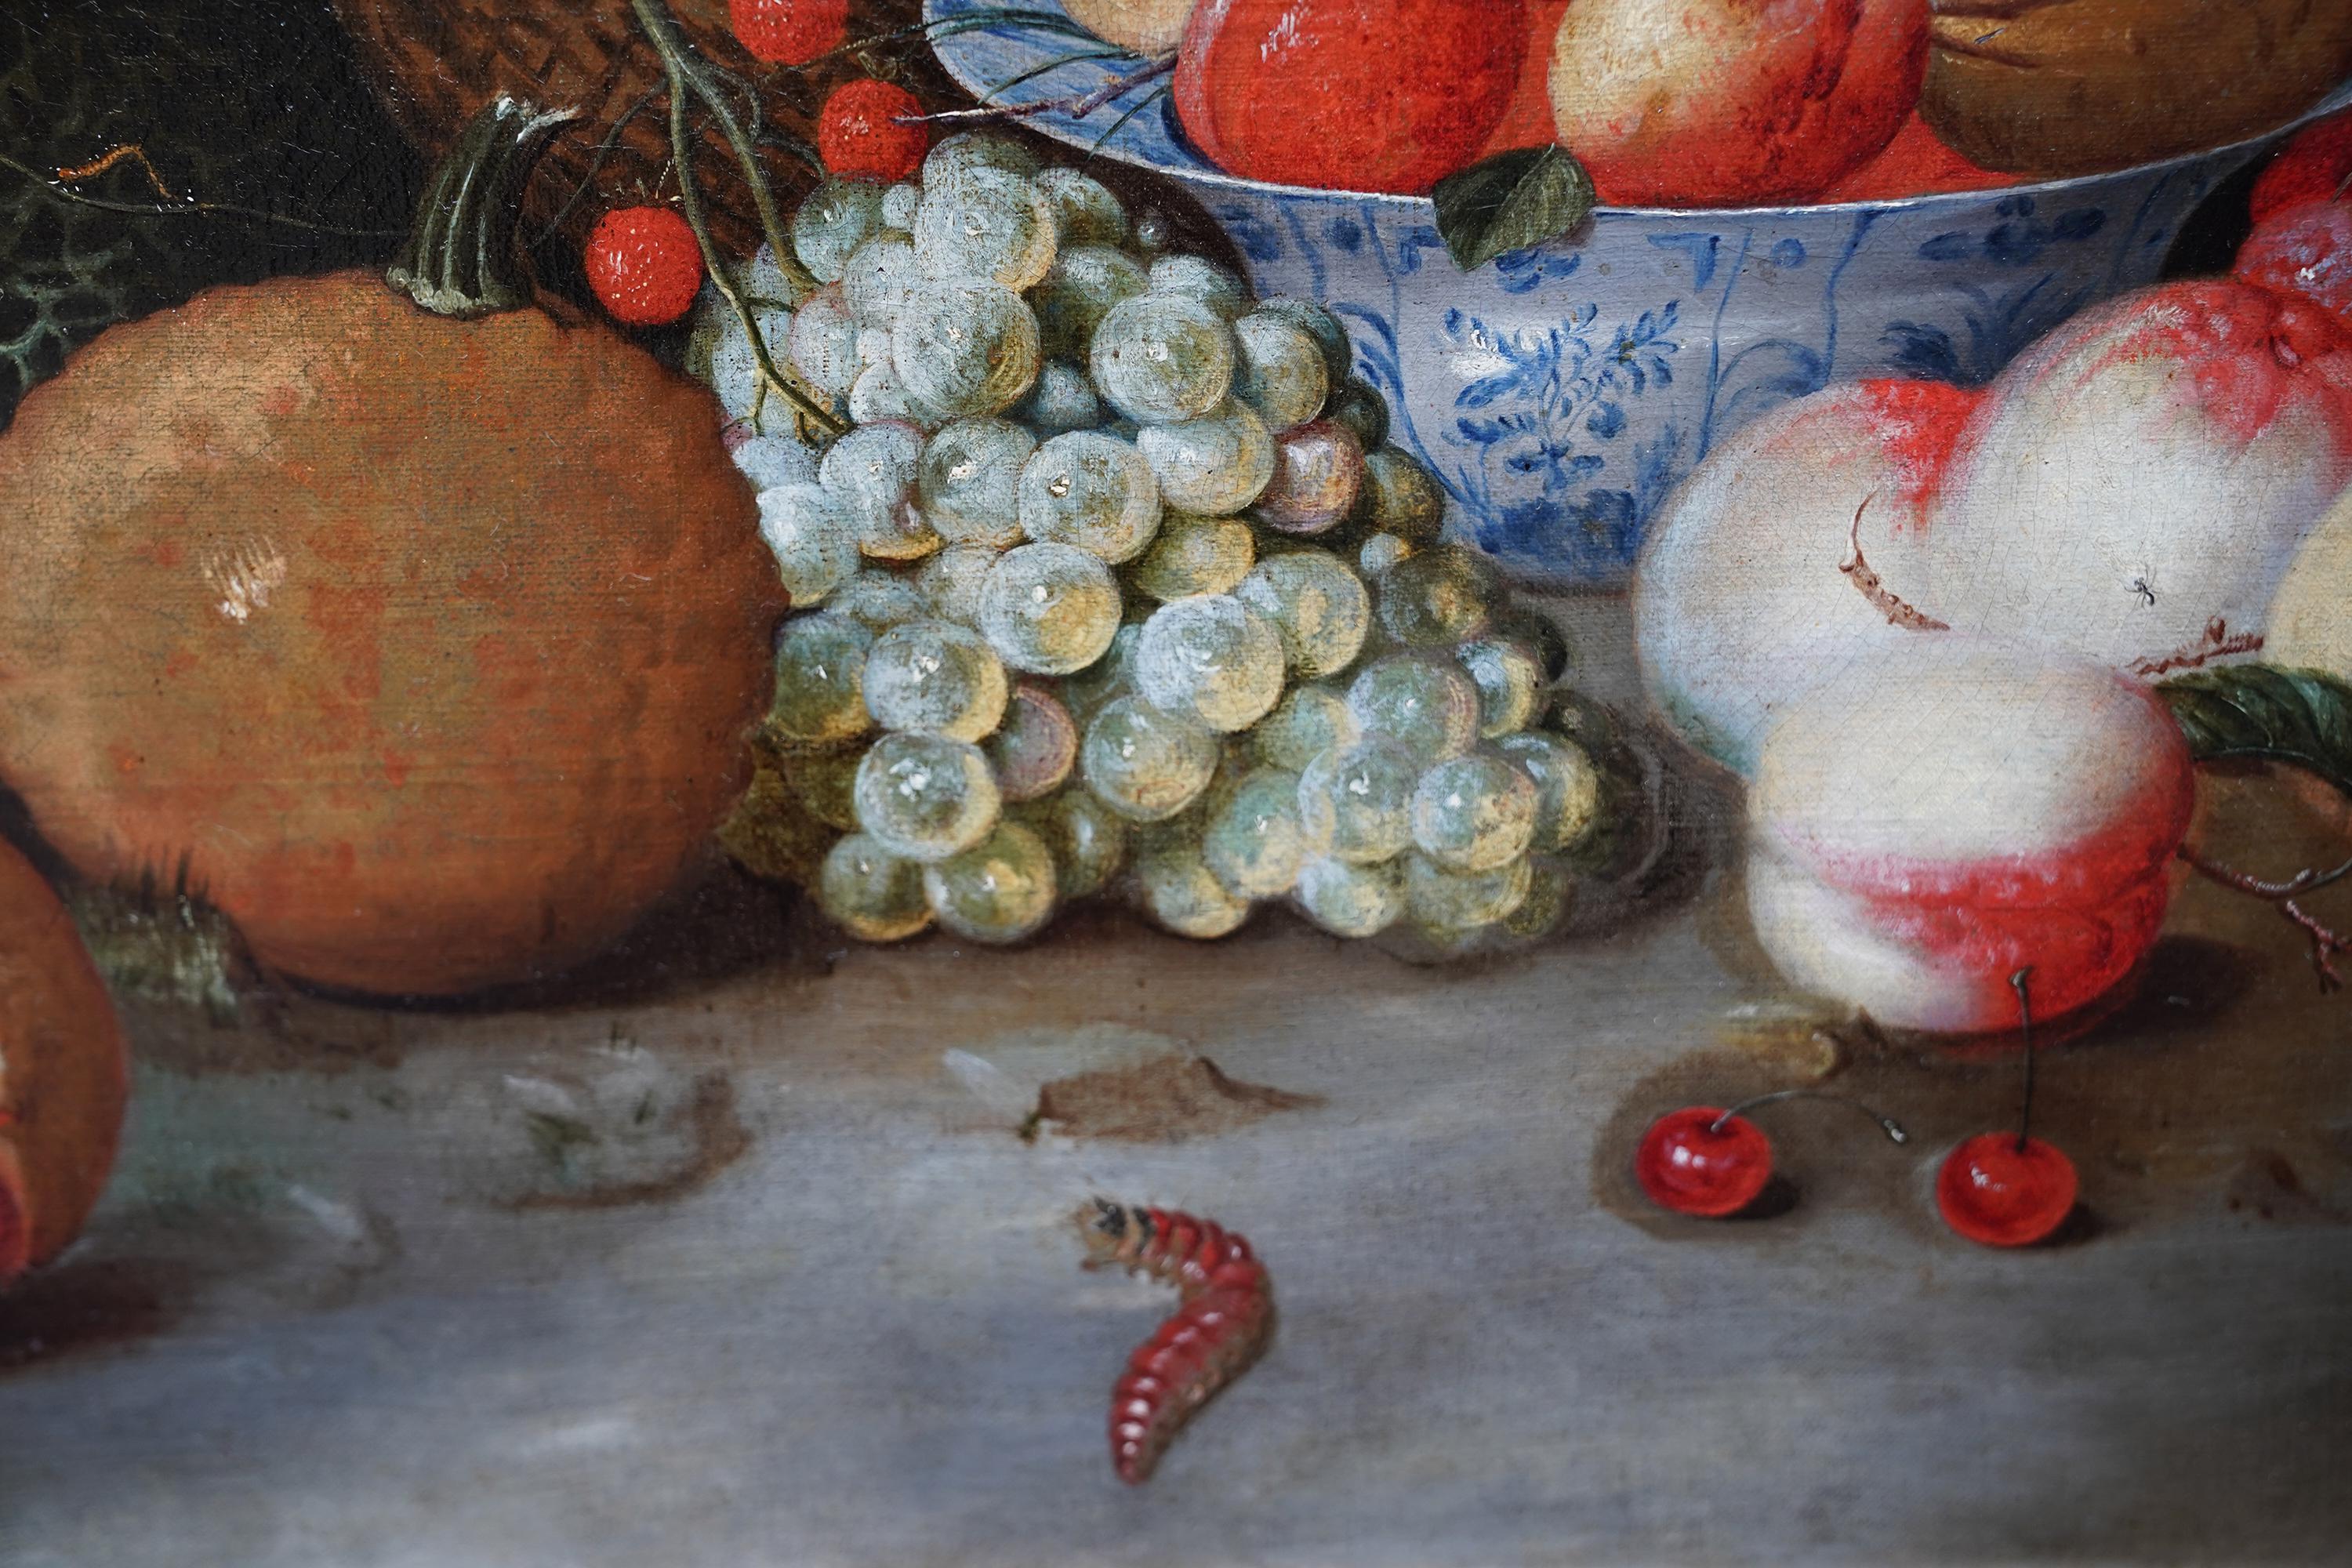 A fine Dutch still life Old Master by Leendert de Laeff which is signed and dated 1664. This oil on canvas on panel depicts a still life of fruit with insects and butterflies. A superb 17th century Old Master in a fine frame. Stunning in its